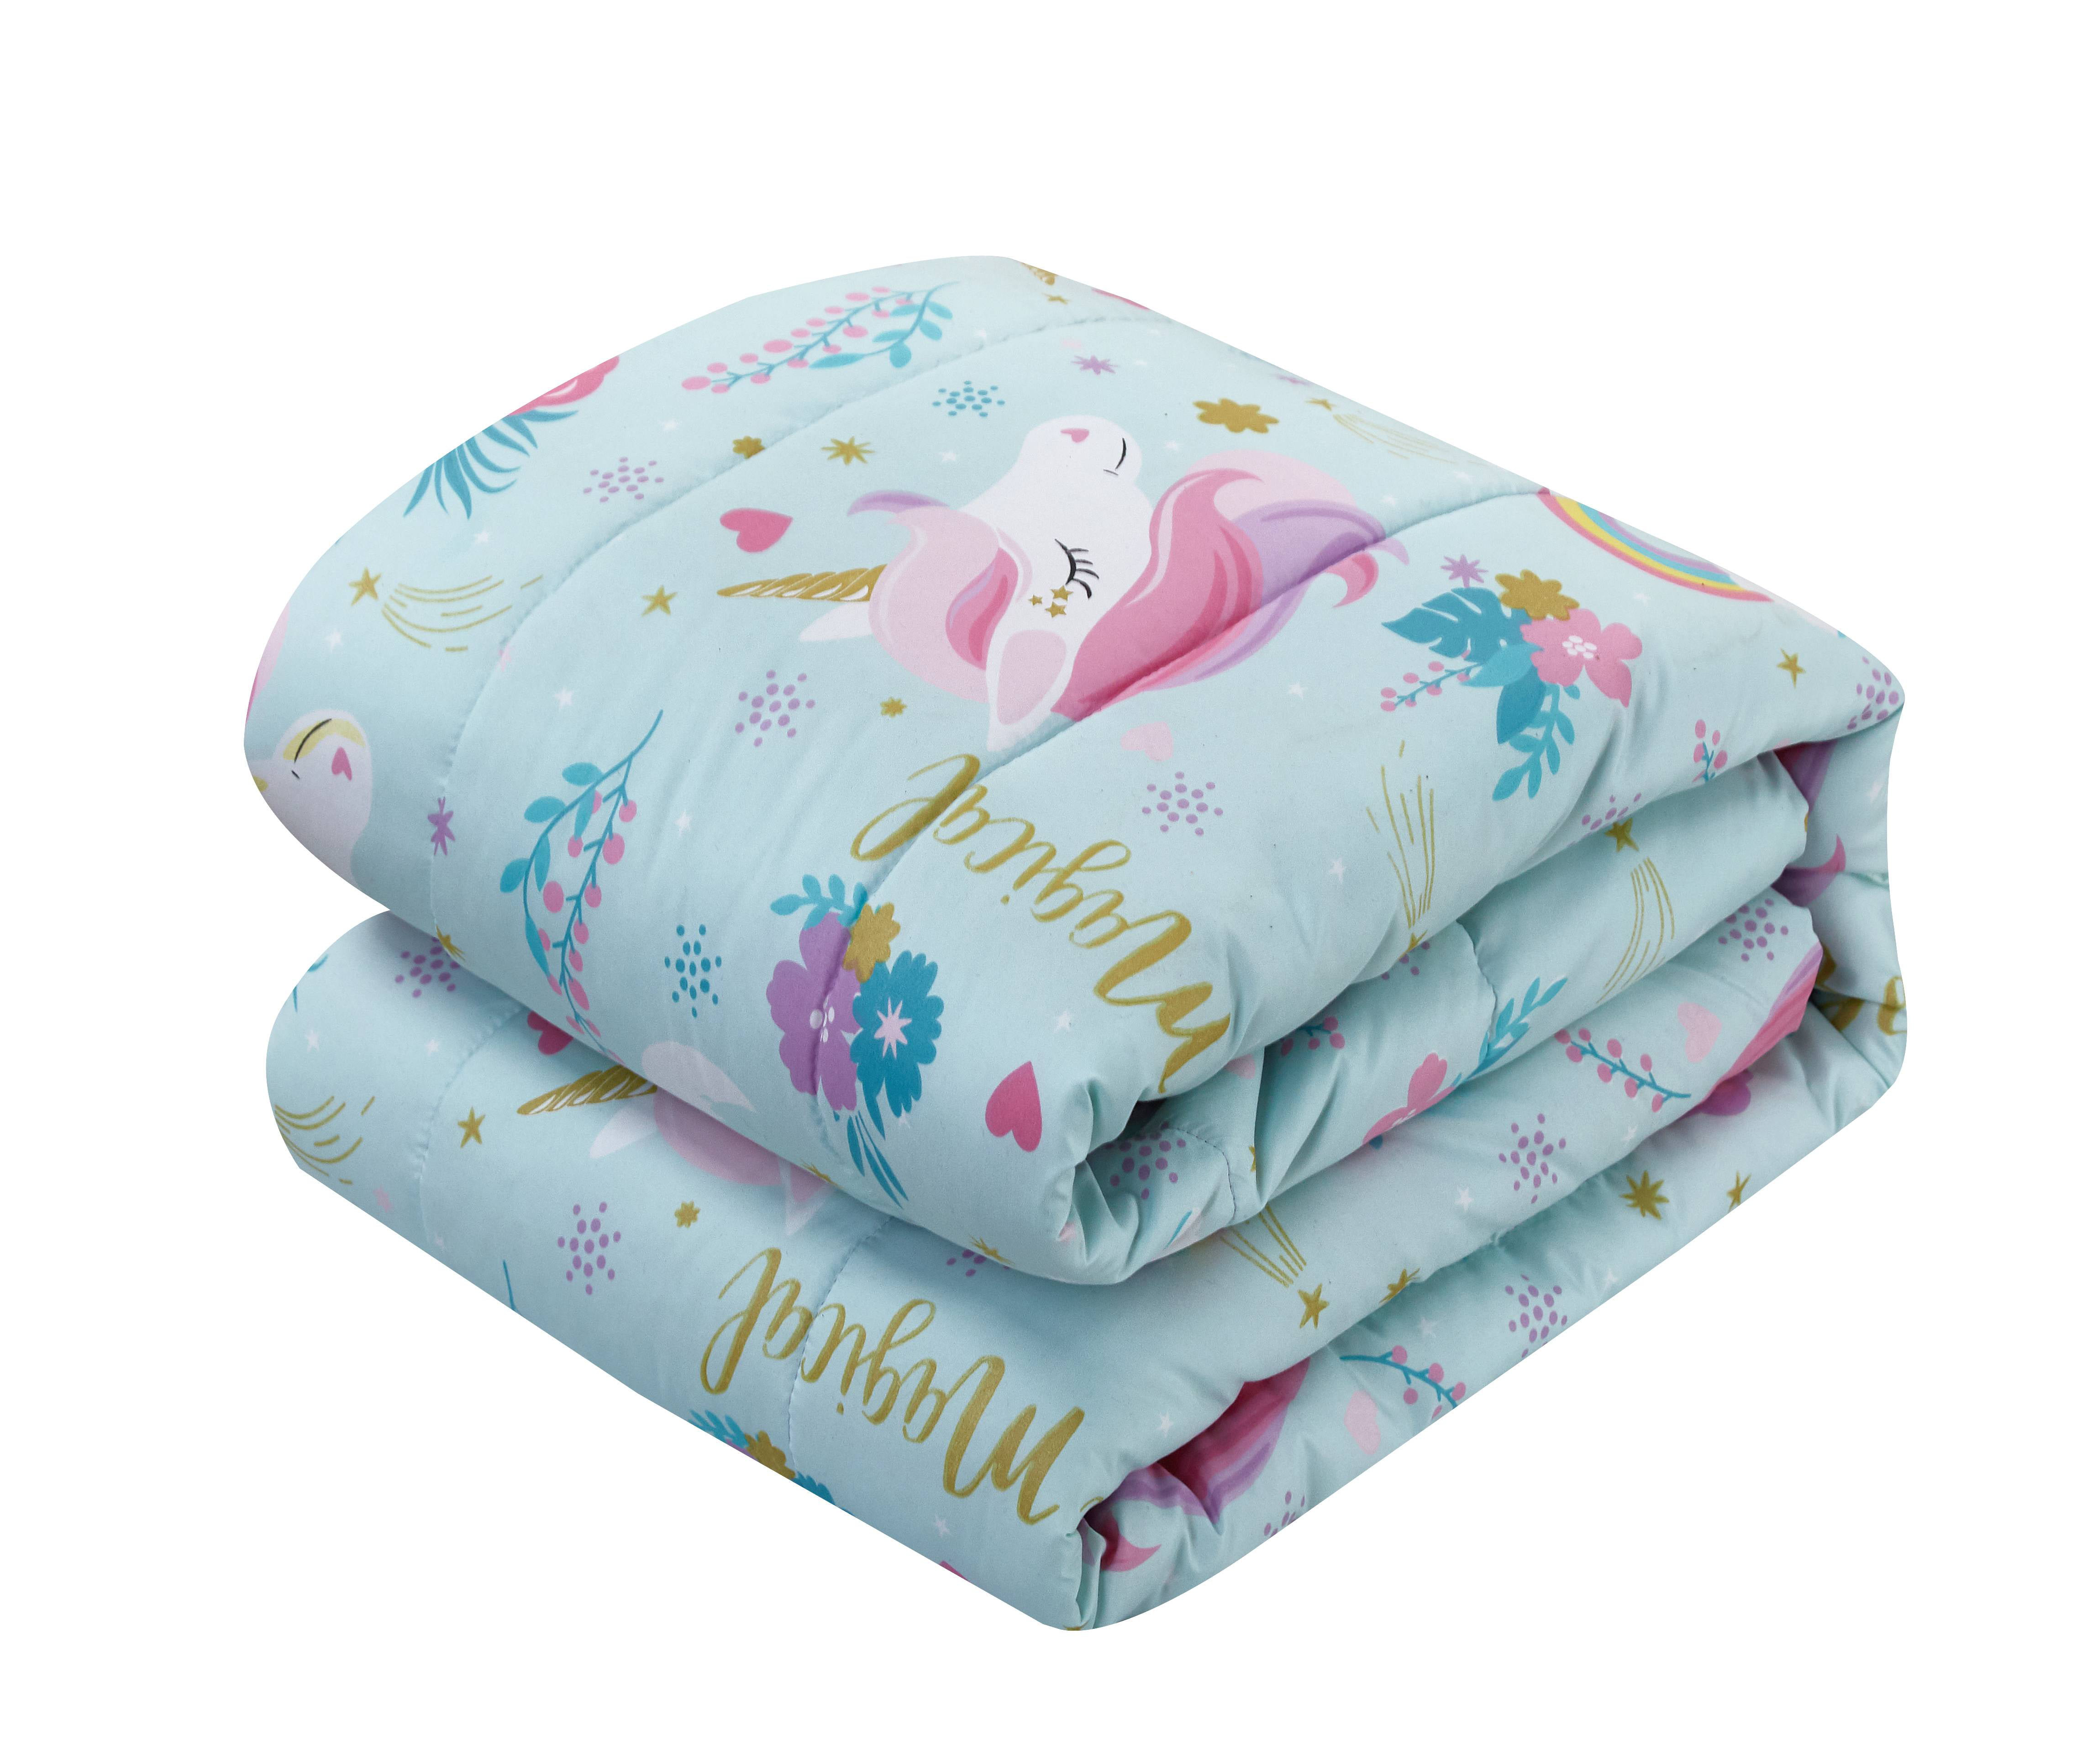 Details about   Heritage Kids Kids and Toddler Ultra-Soft Sleepy Unicorn and Rainbow Easy-Wash M 